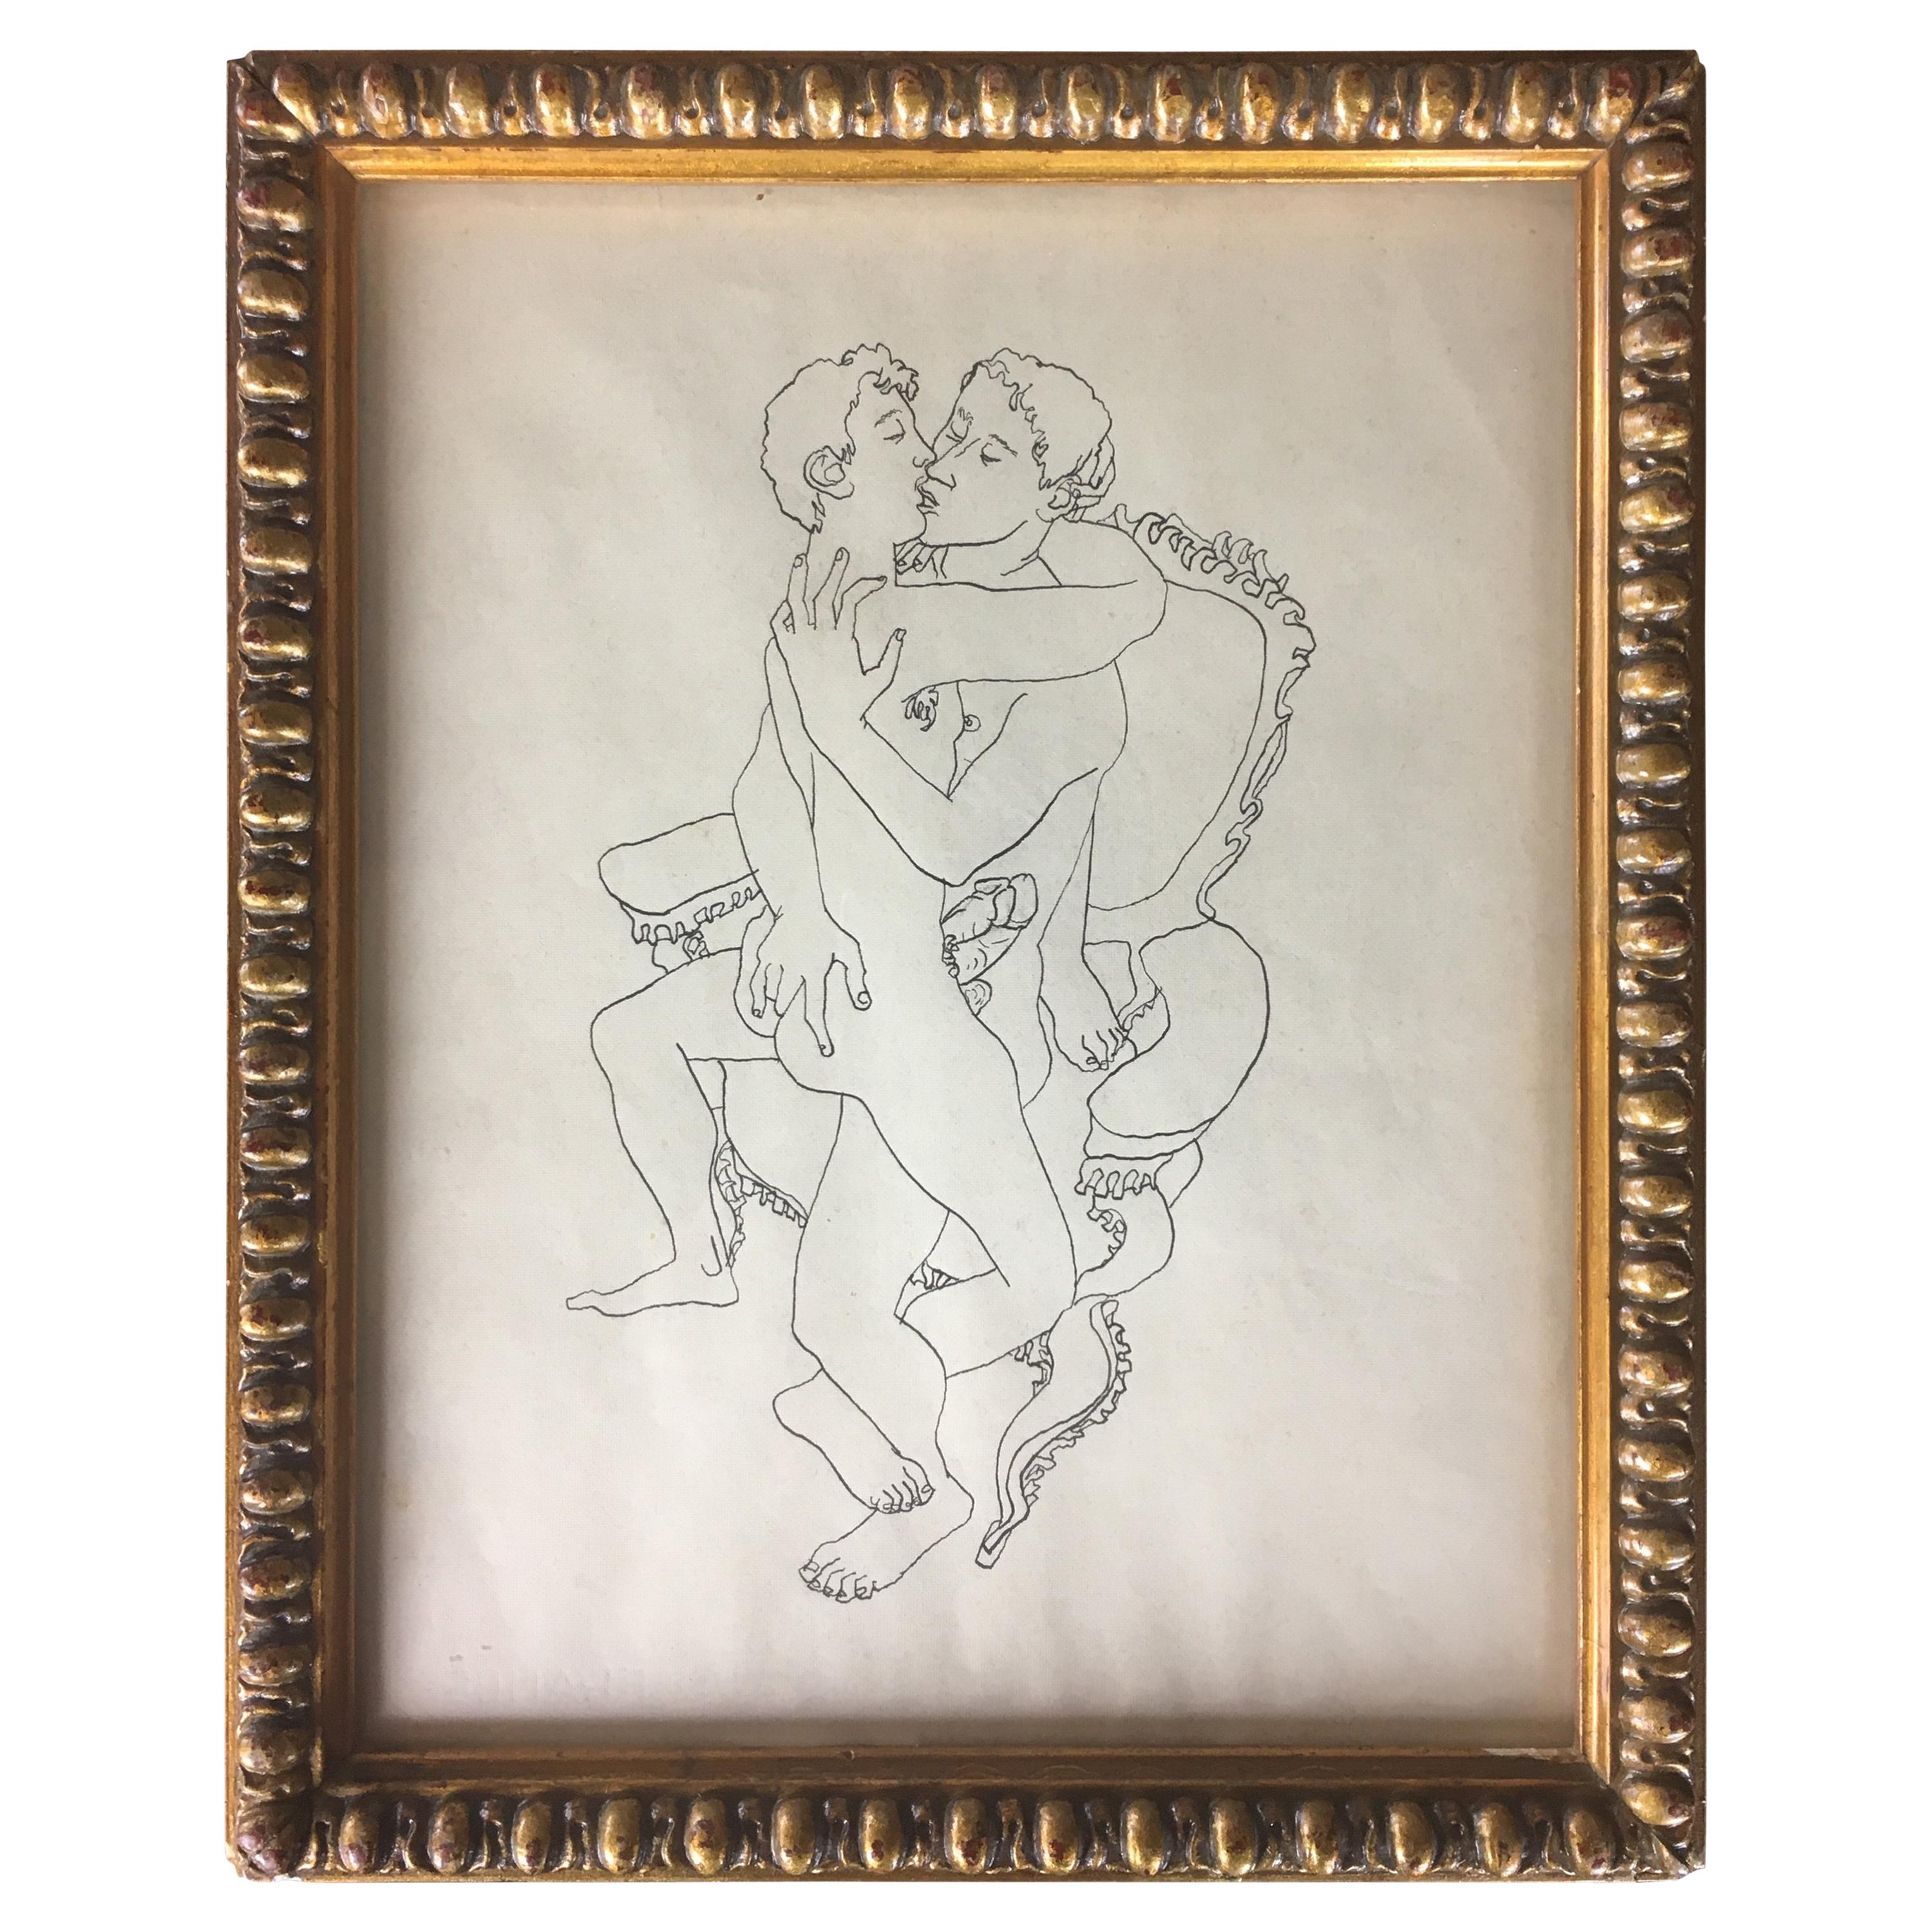 Erotic Art Ink Drawing Attributed to Jean Boullet